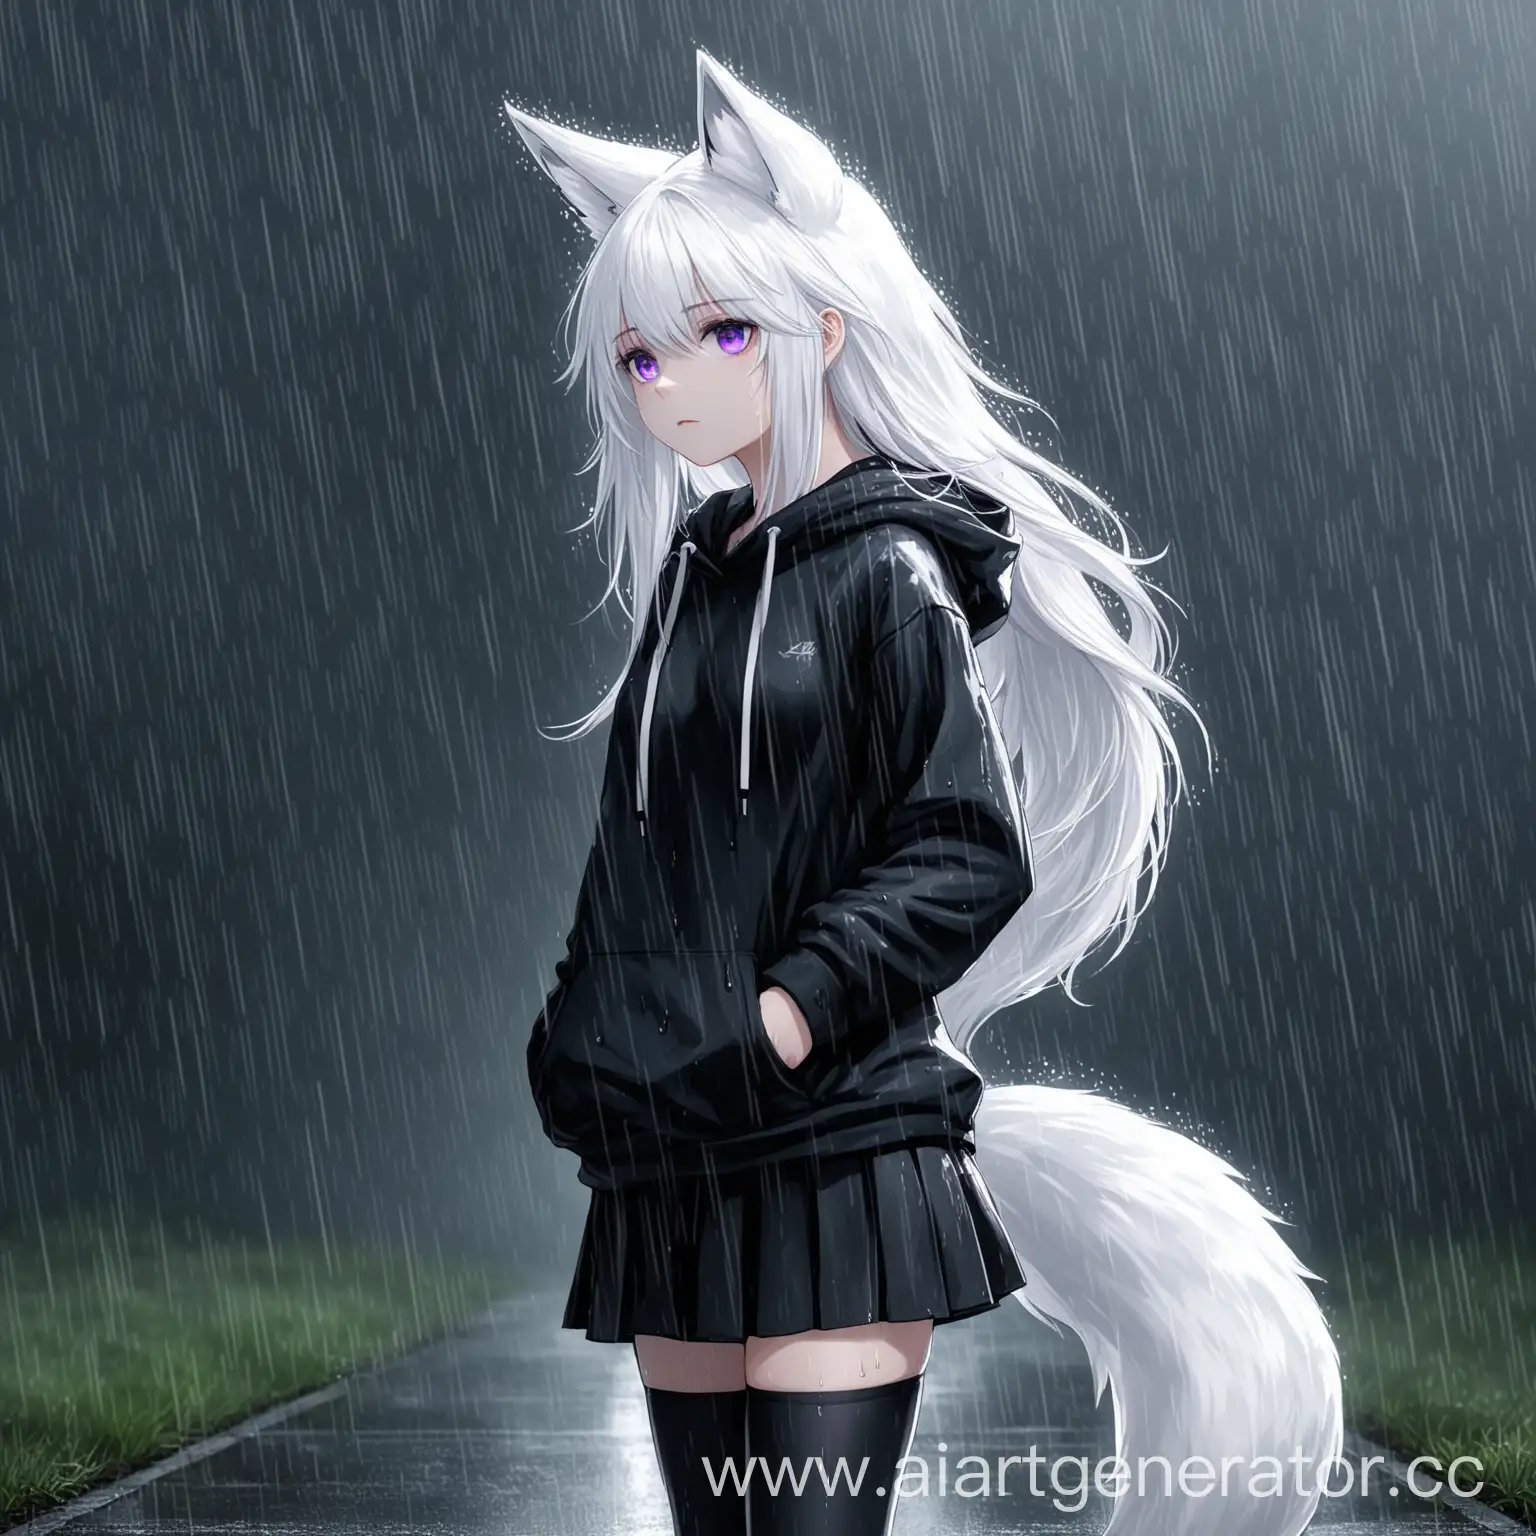 WhiteHaired-Girl-with-Fox-Ears-in-Black-Hoodie-Embraces-Rain